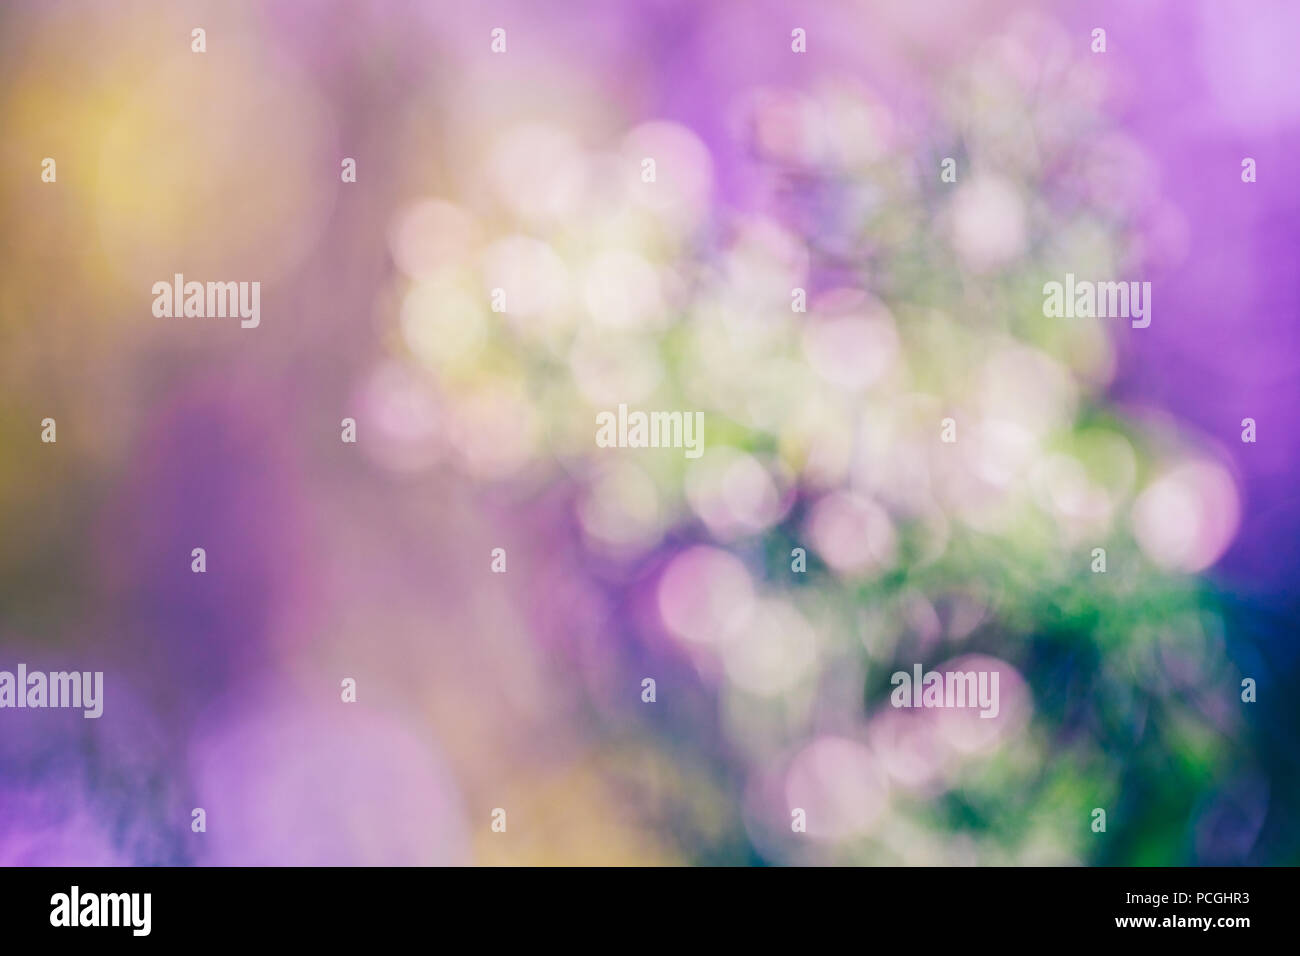 Beautiful dreamy magic pink white green abstract colorful blurry ...